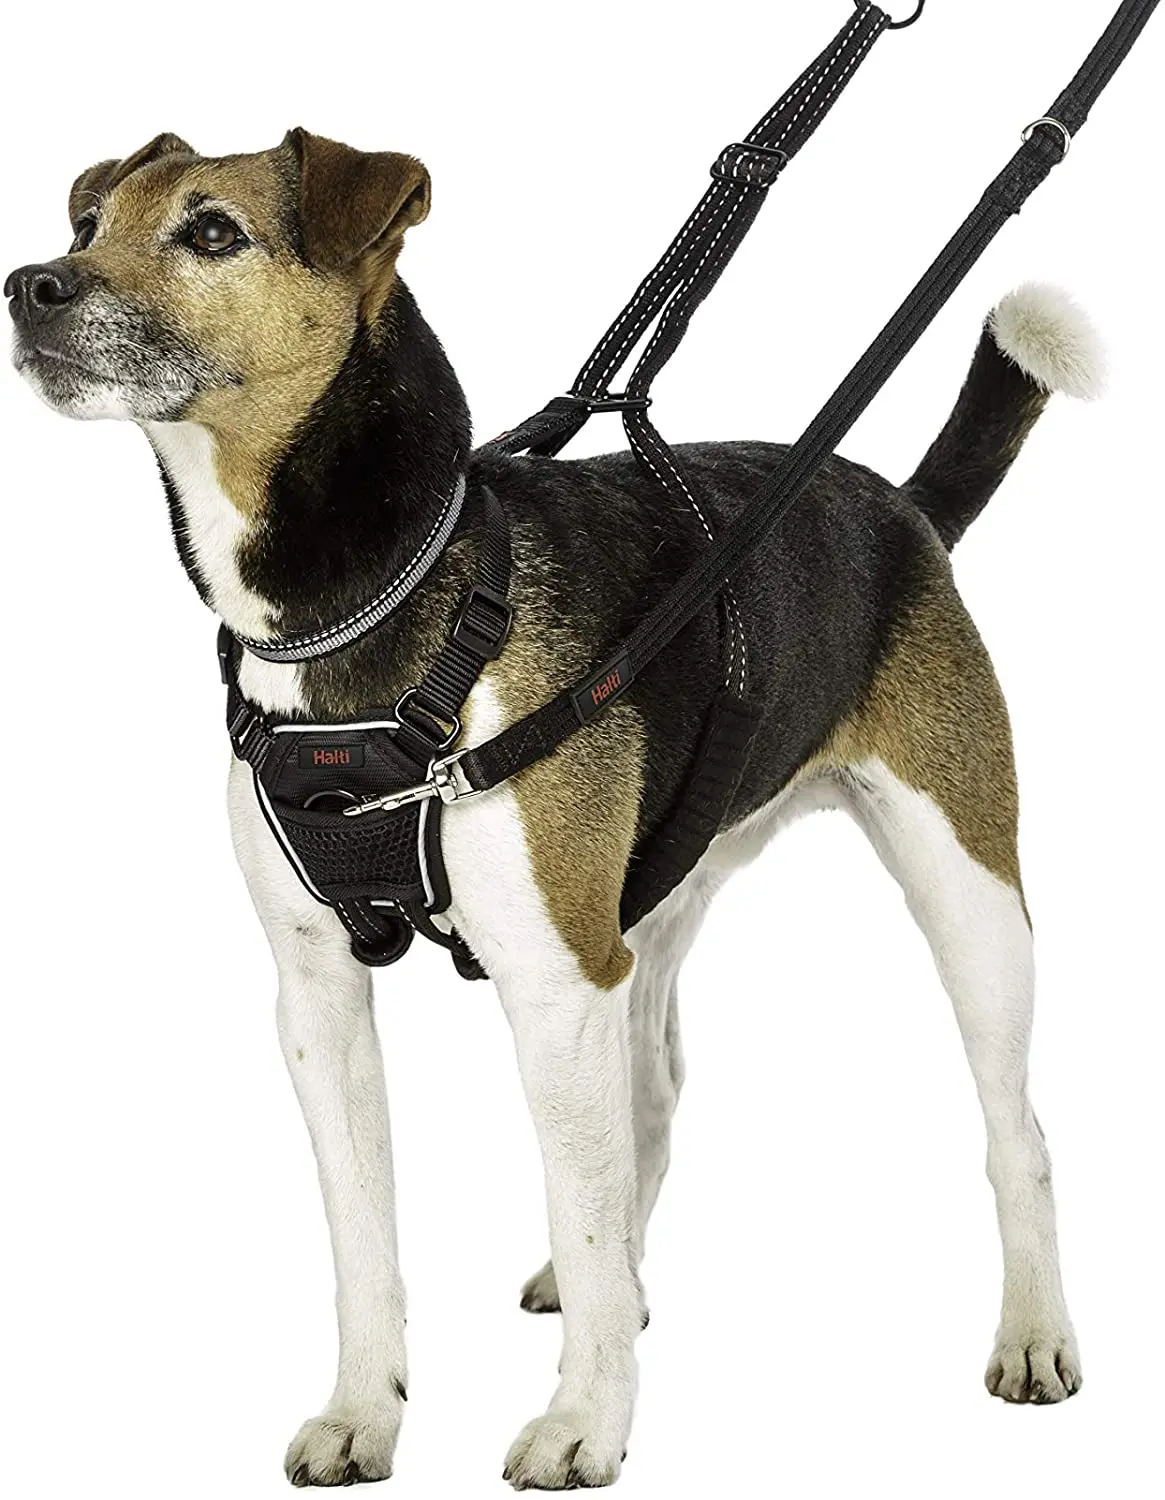 HALTI No Pull Harness Size Large, Bestselling Professional Dog Harness to  Stop Pulling on The Lead, Easy to Use, Anti-Pull Training Aid, Adjustable